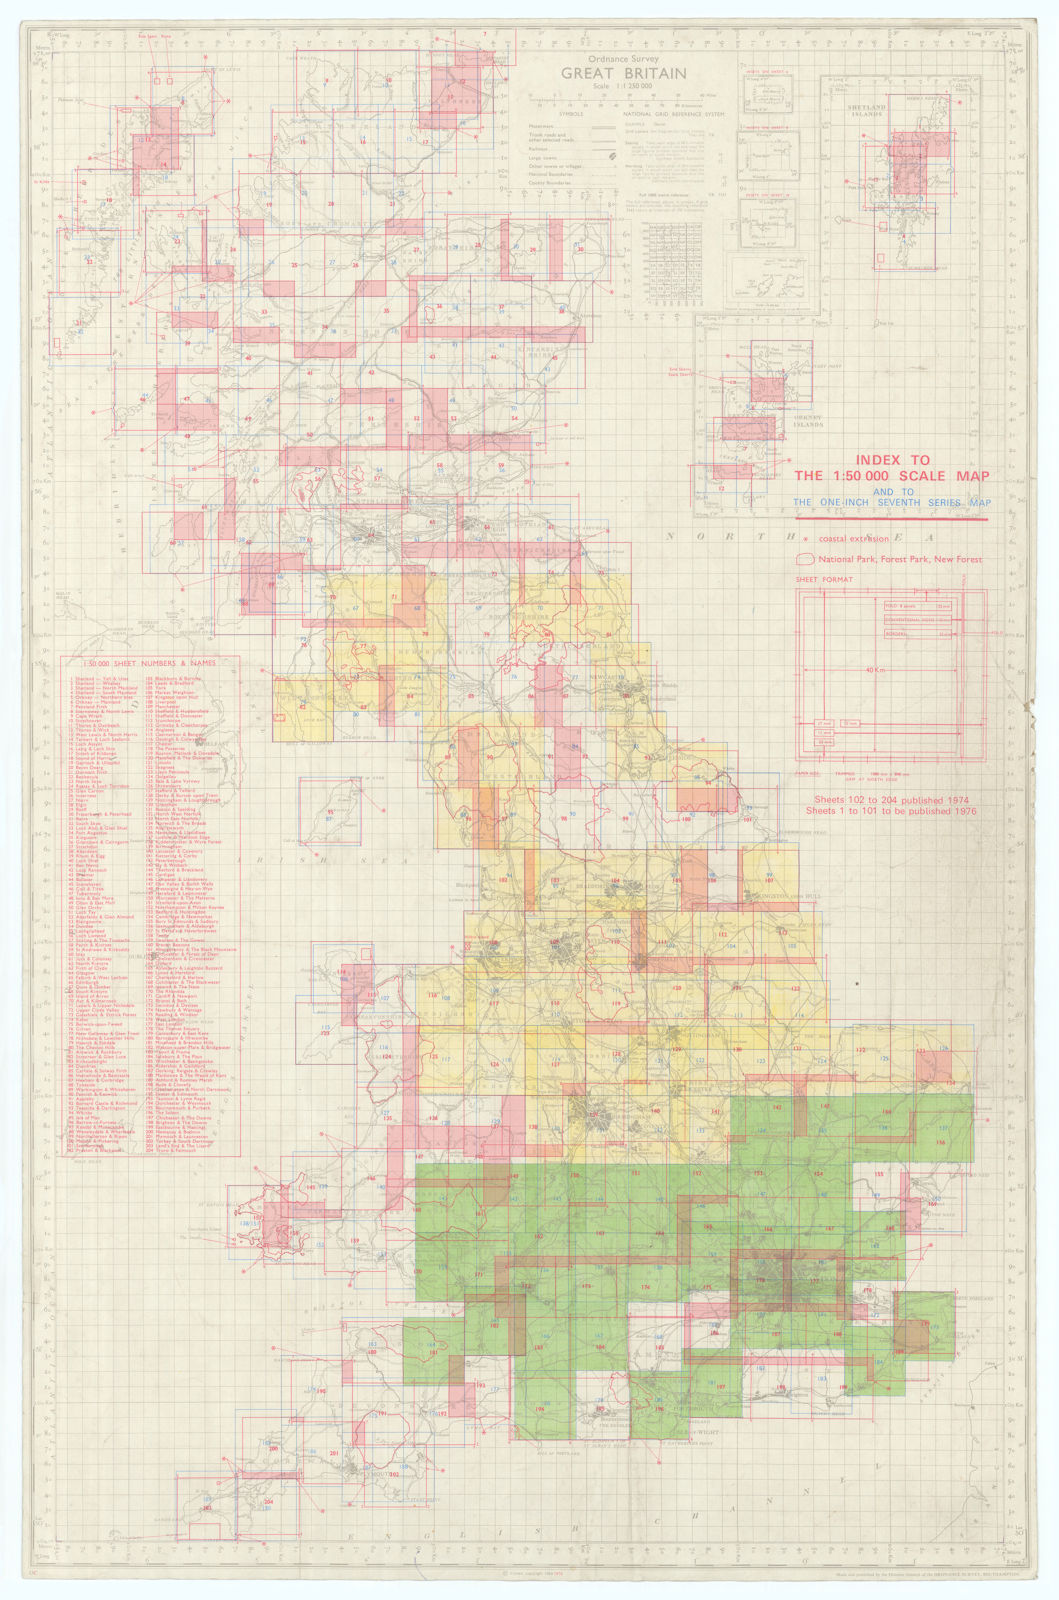 Associate Product Ordnance Survey Great Britain Index 1:50000 scale & One-inch 7th series 1974 map